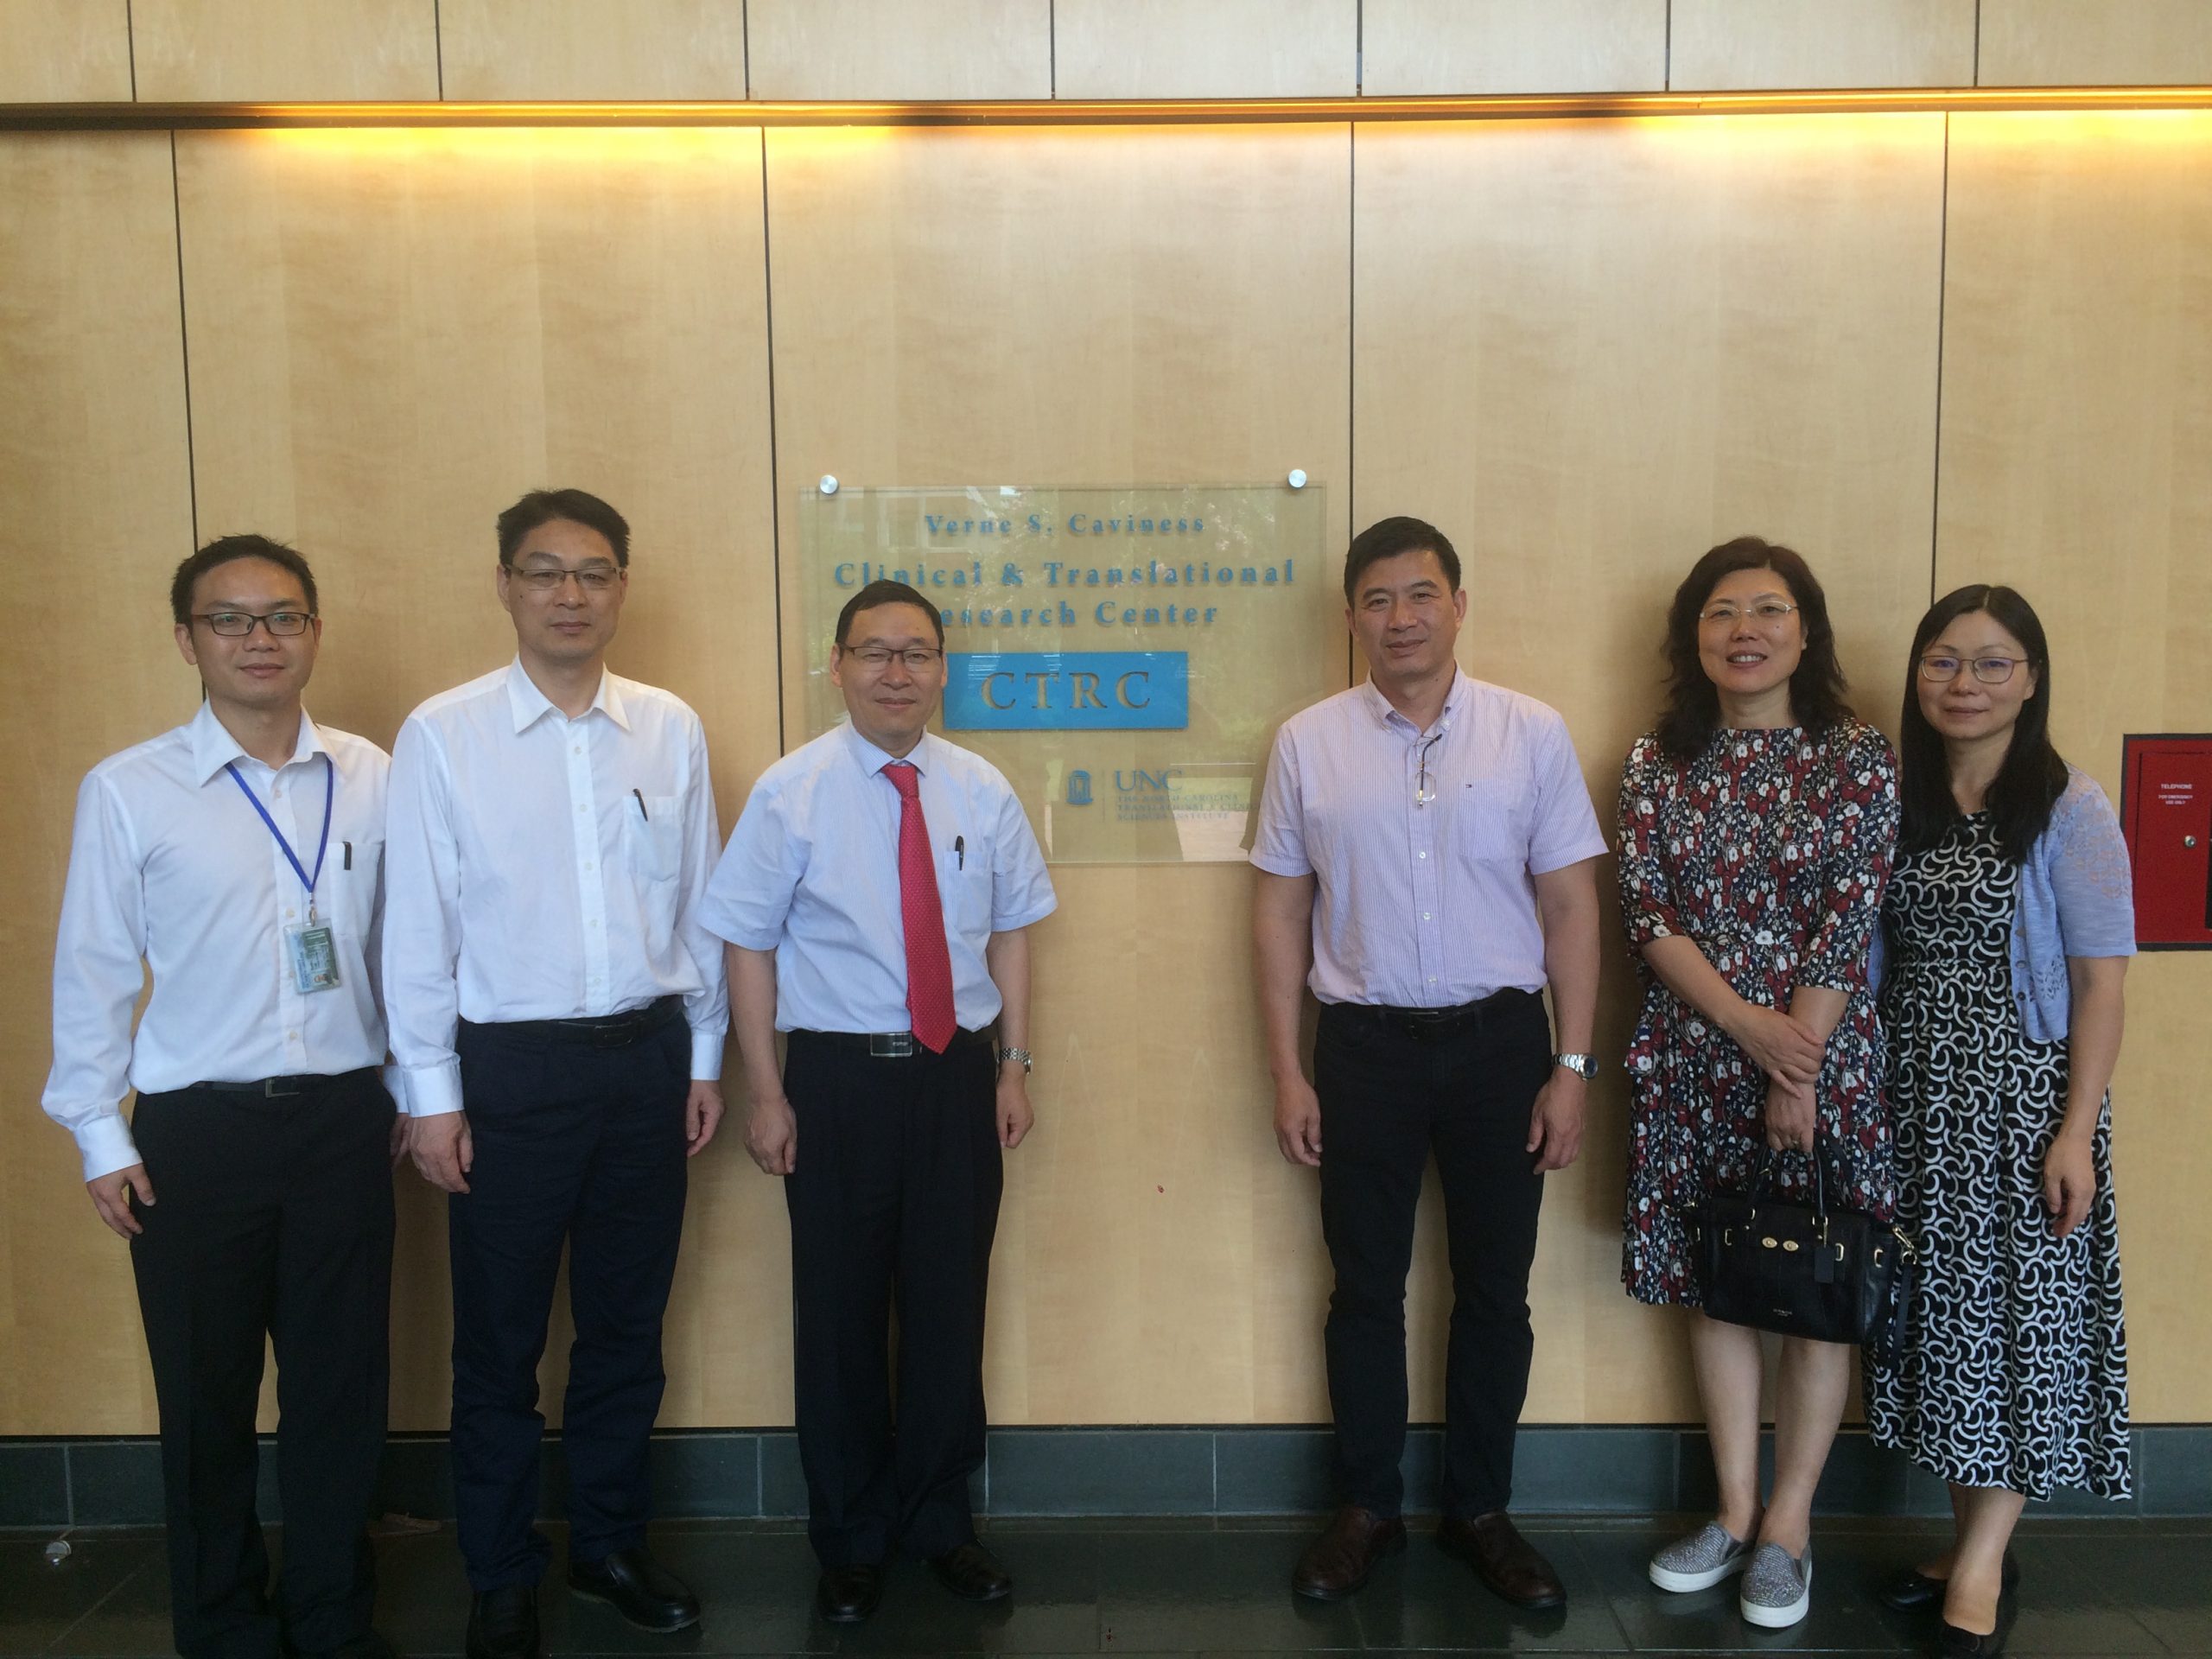 UNC Project China Trainees visit Chapel Hill's Clinical and Translational Research Center